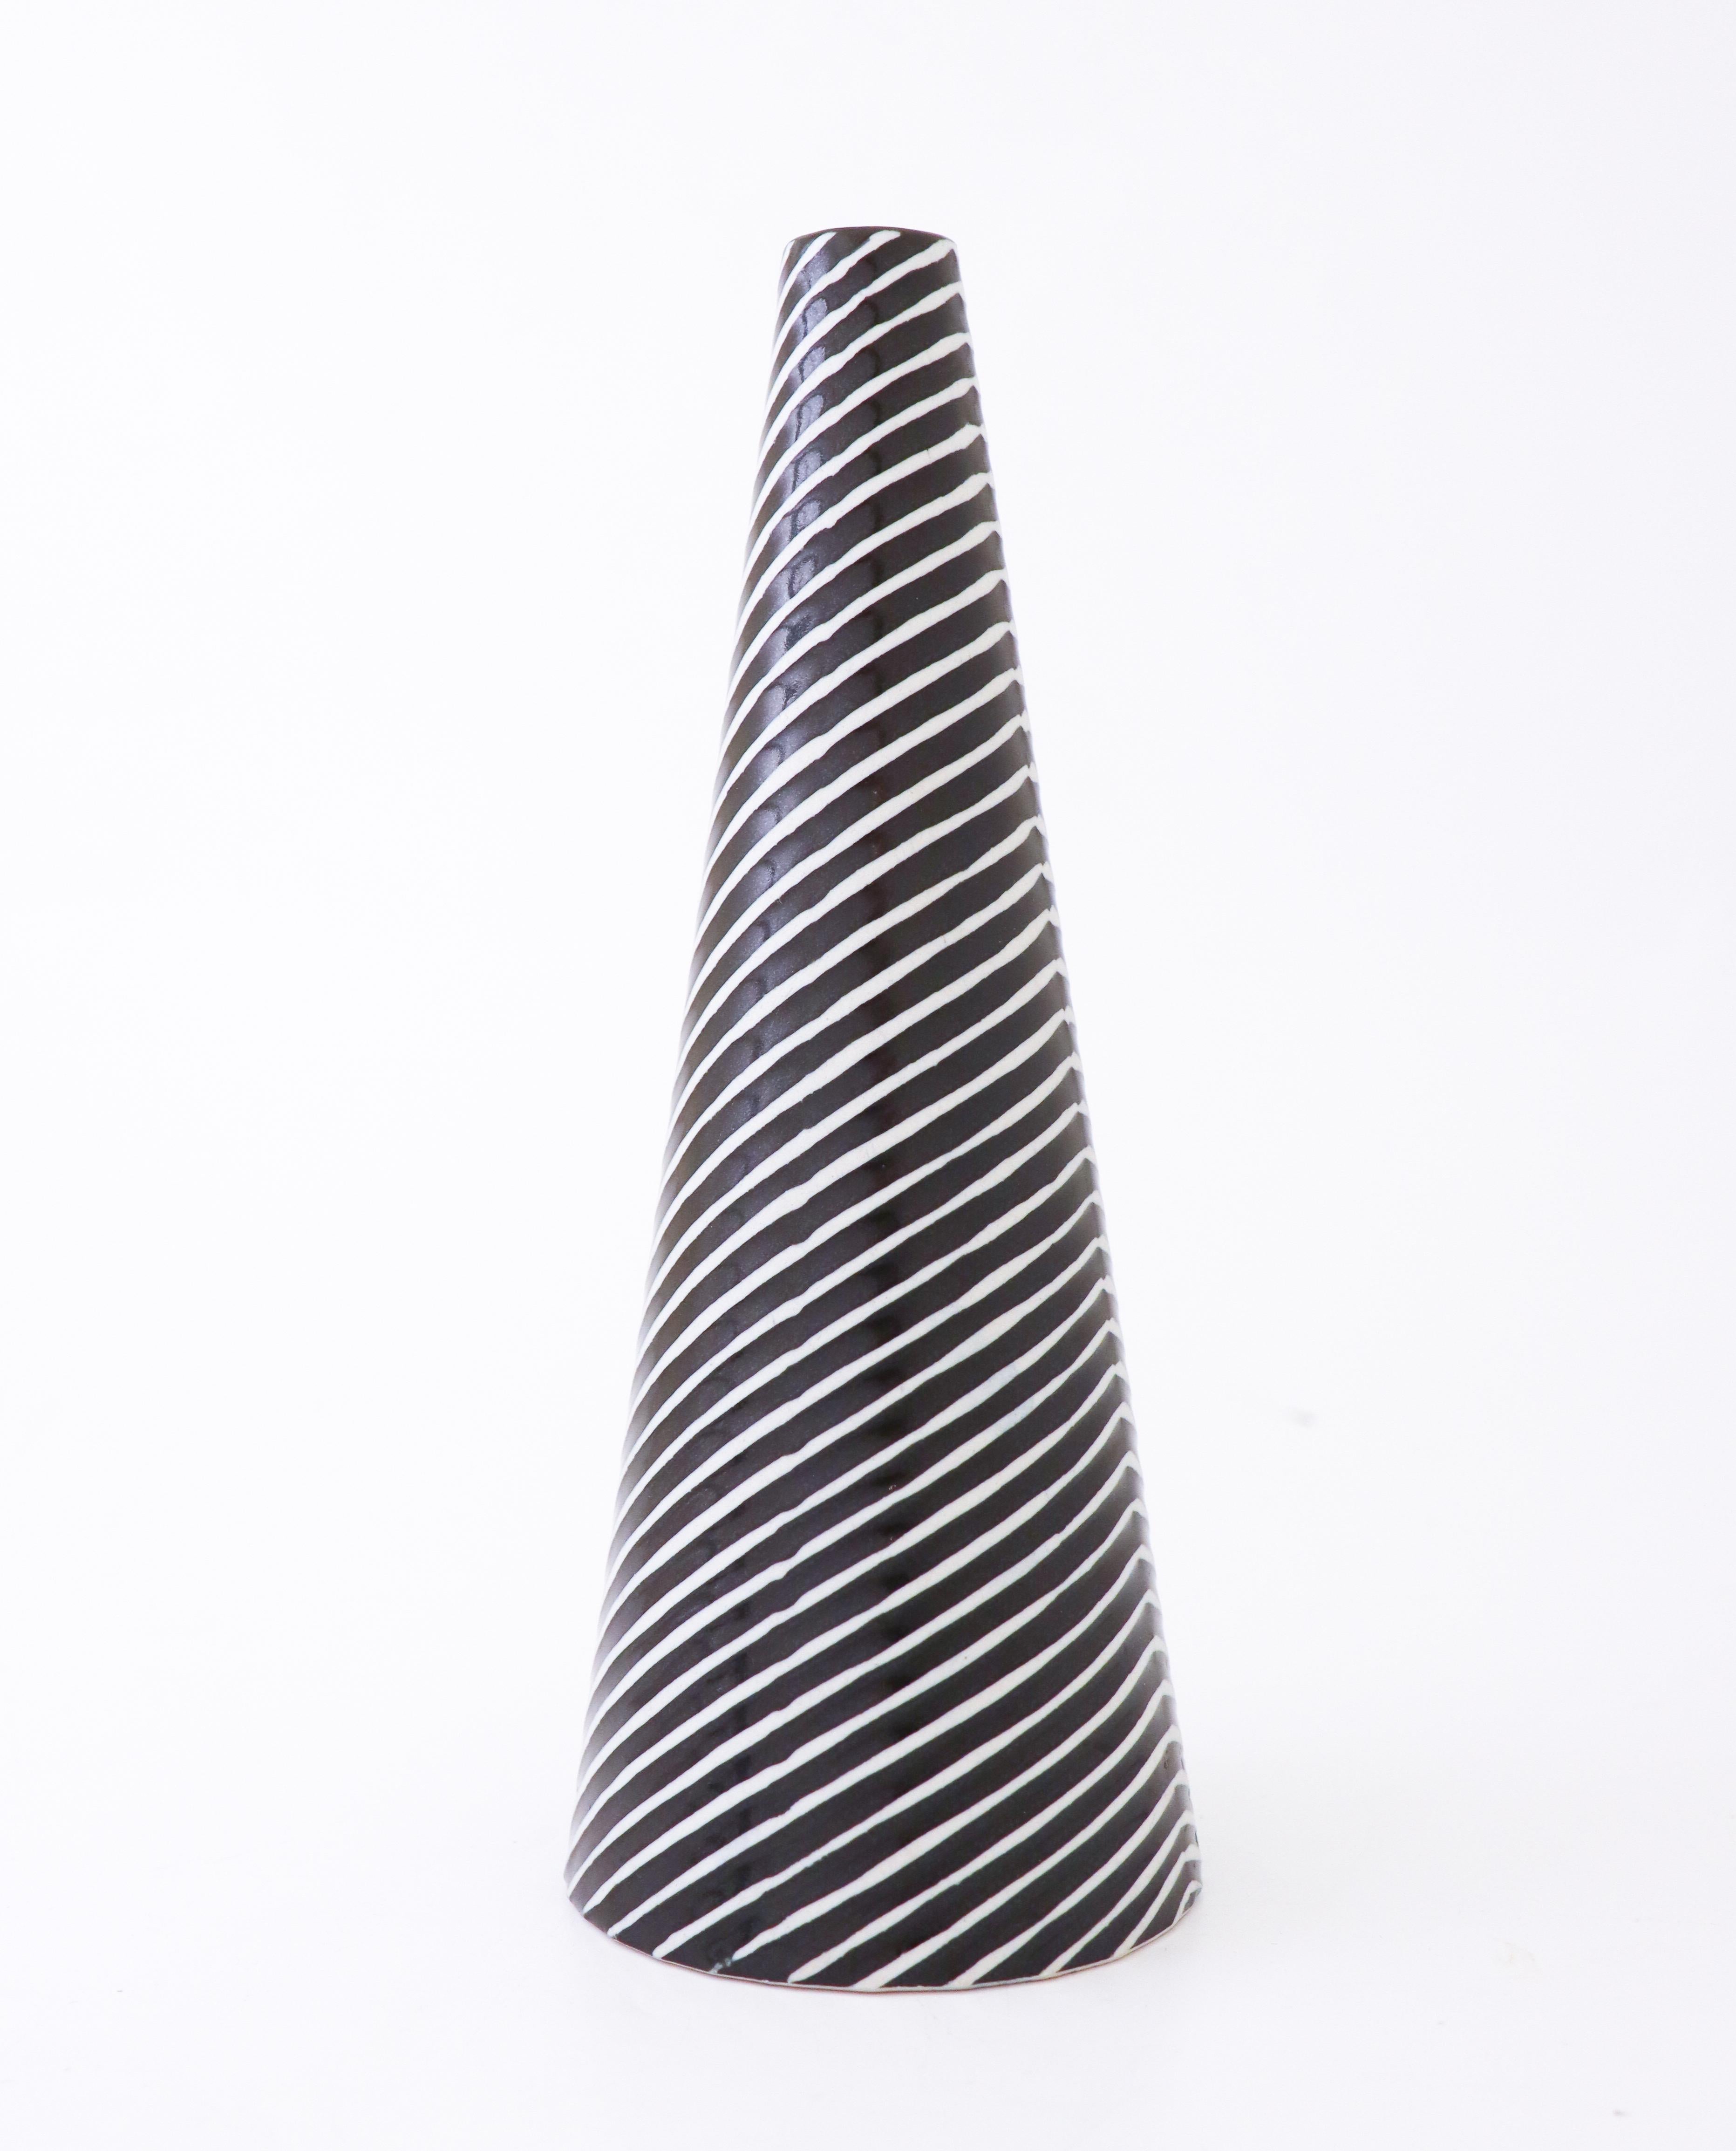 A lovely vase designed by Stig Lindberg at Gustavsberg. It is 23,5 cm high and 9 cm in diameter and have a lovely glaze. It is in very good condition except from a minor mark at the lower rim from the production. 

The Domino serie was created by